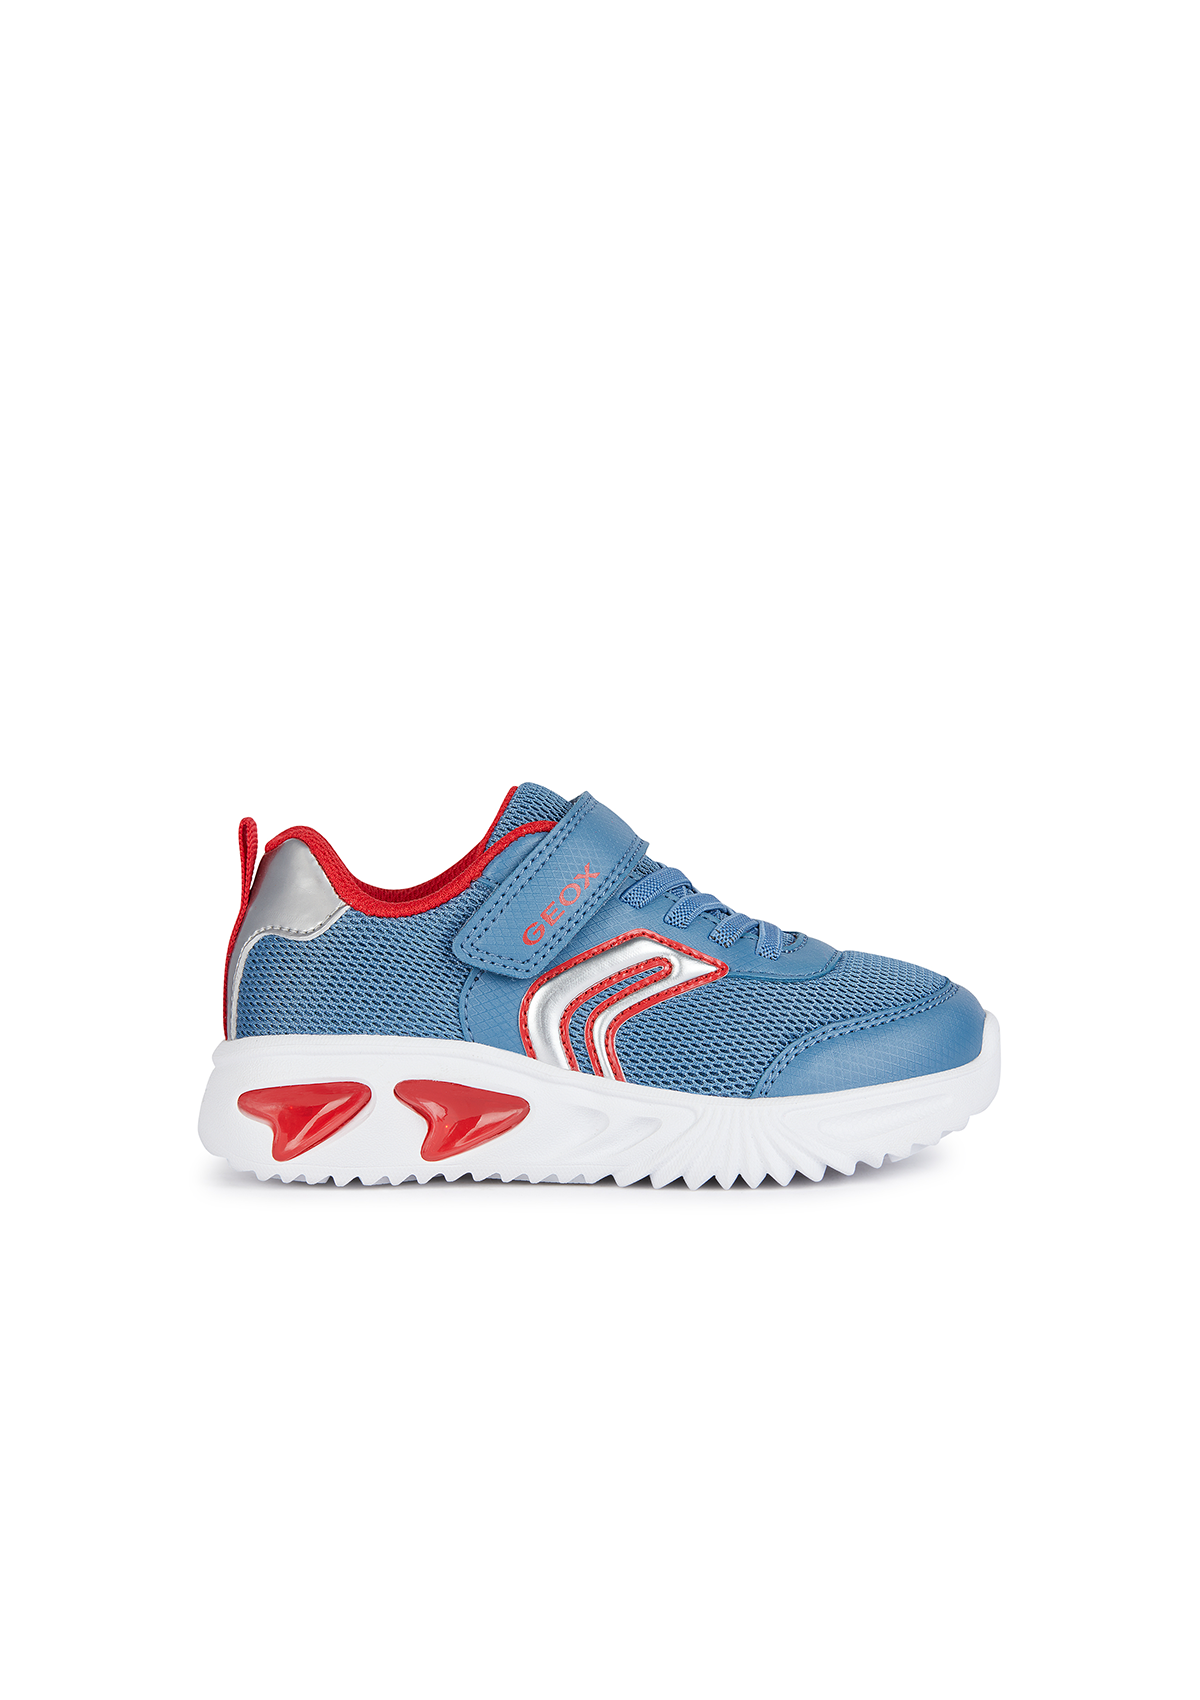 Geox Boys Trainer ASSISTER Lights-Up Avio Red